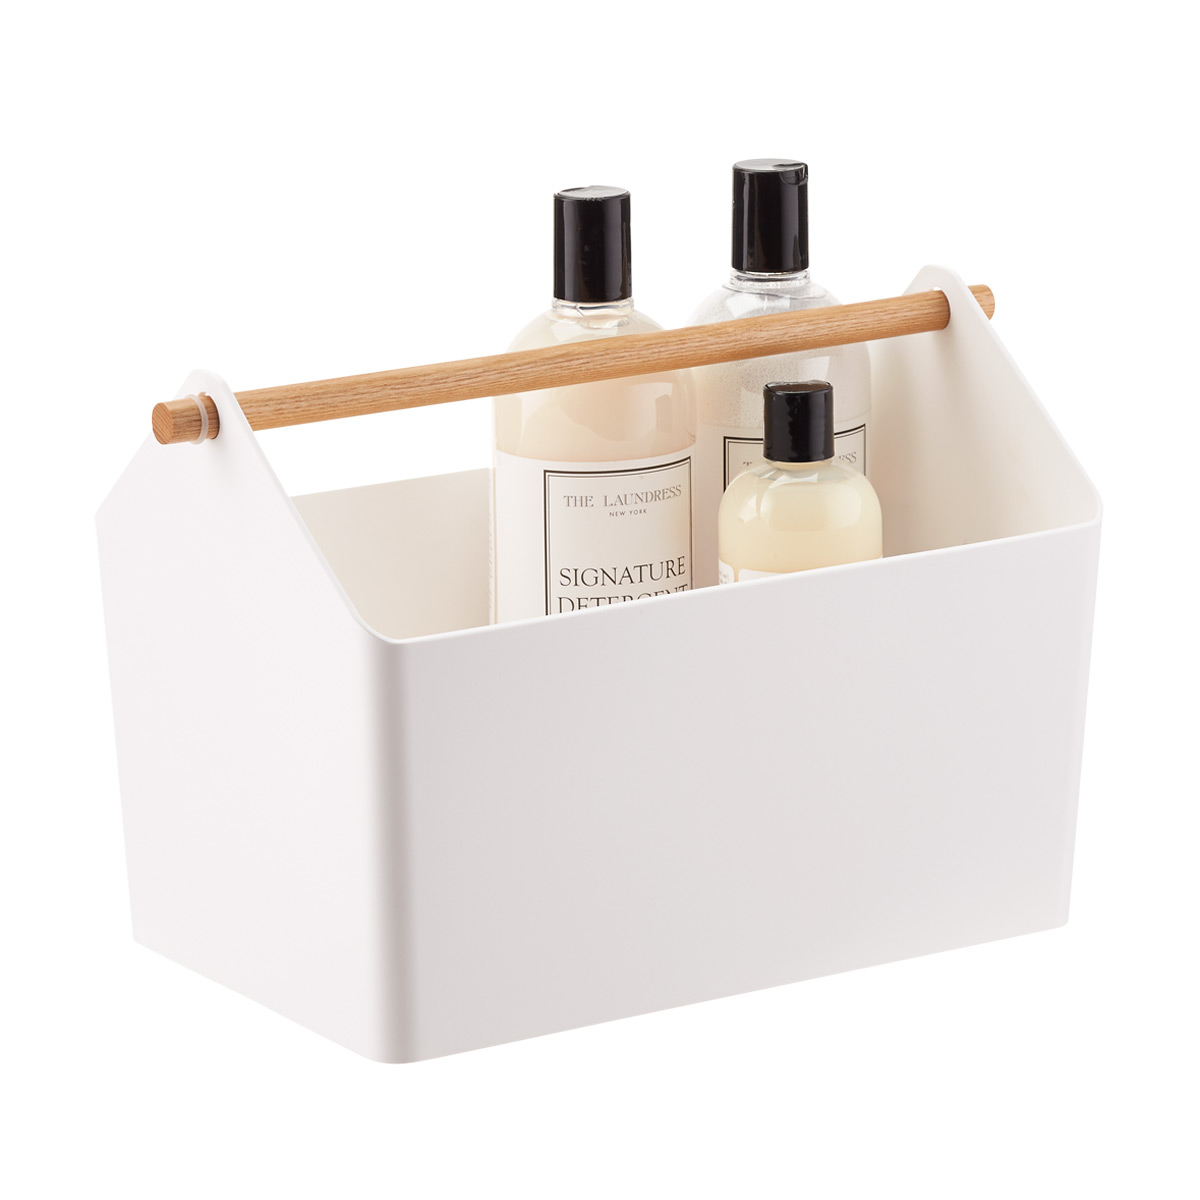 https://www.containerstore.com/catalogimages/360412/10077363-Favori-storage-box-white-na.jpg